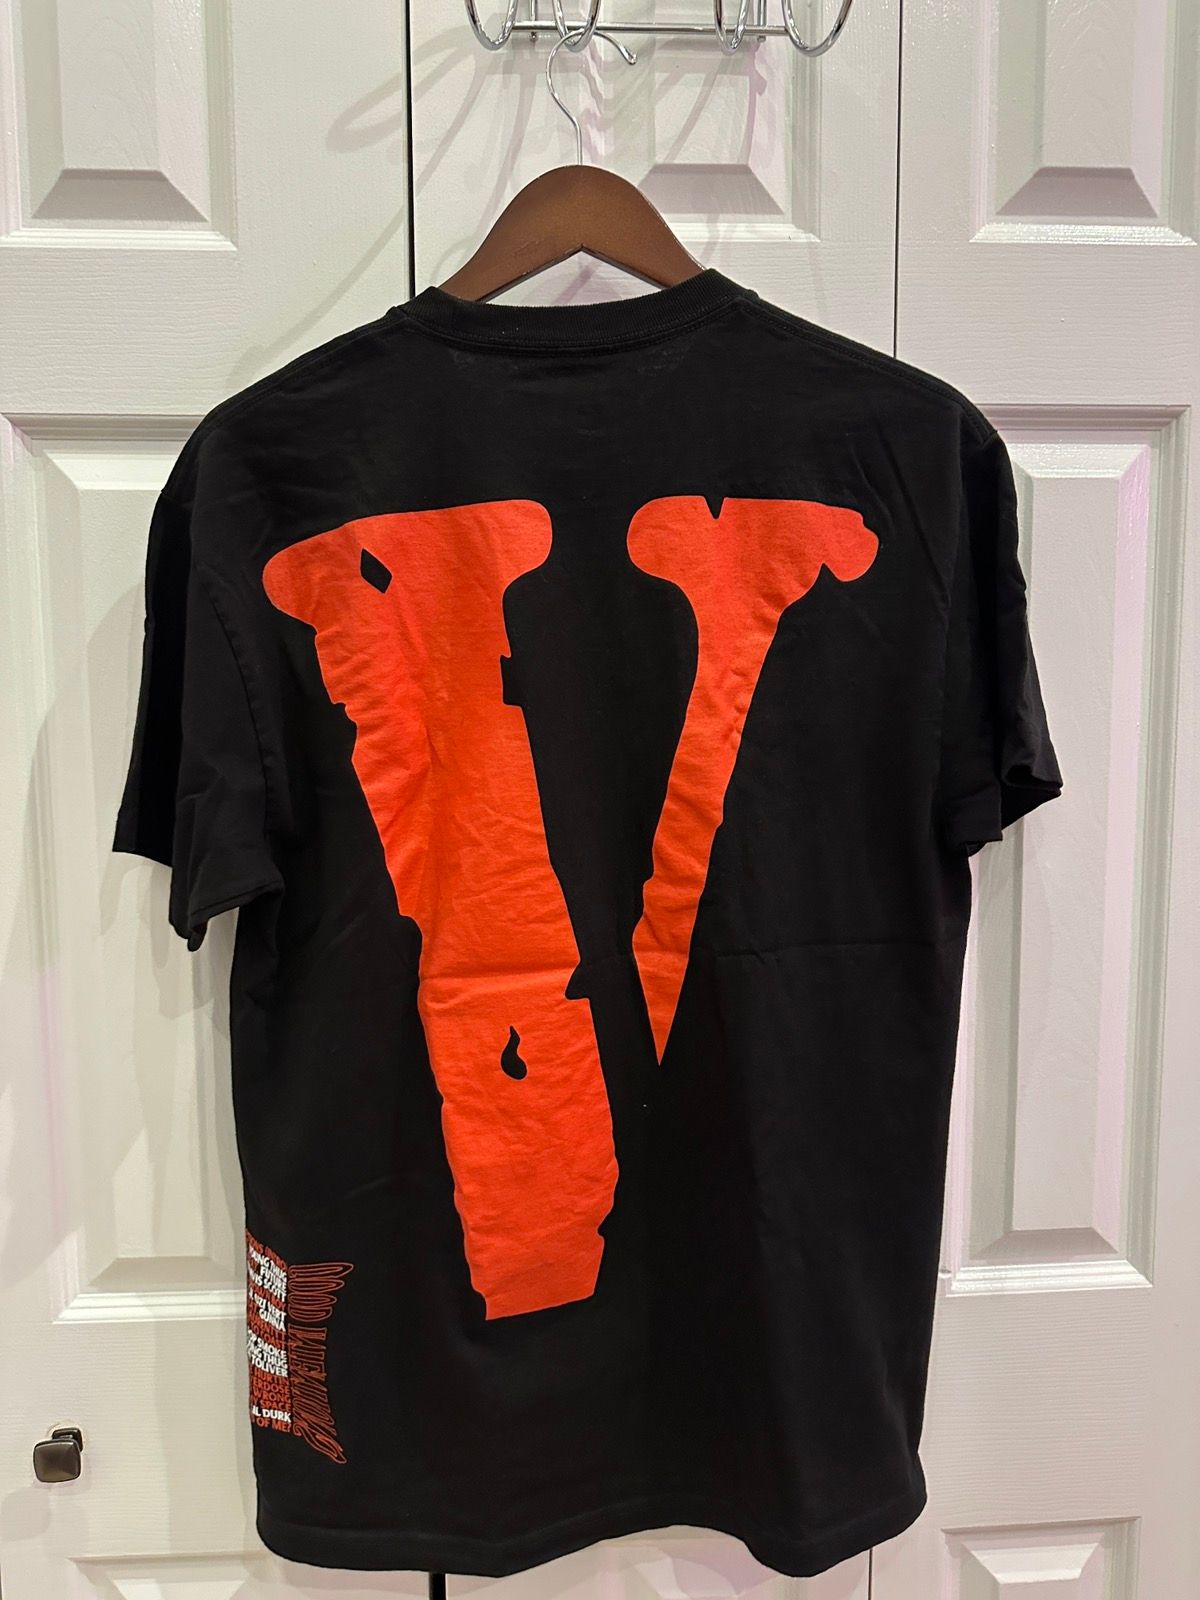 Vlone Vlone X Nav “Good Intentions” Tee Size US L / EU 52-54 / 3 - 2 Preview